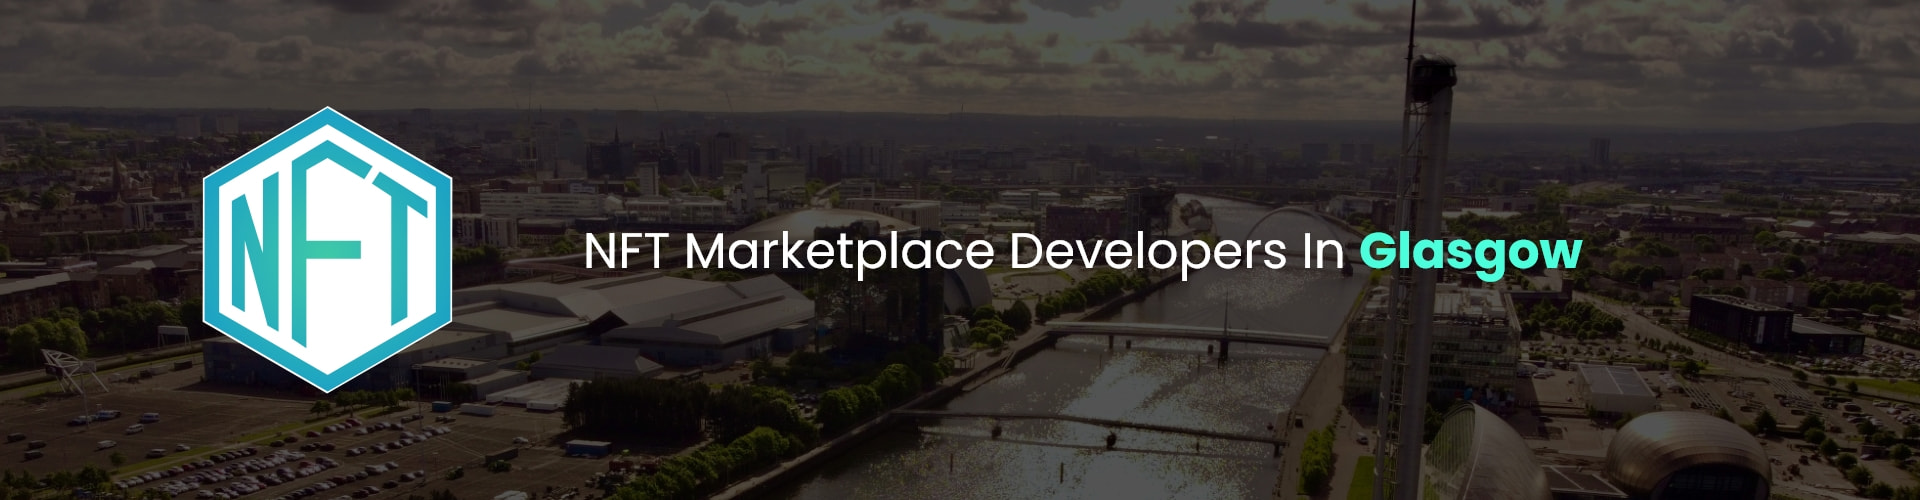 hire nft marketplace developers in glasgow